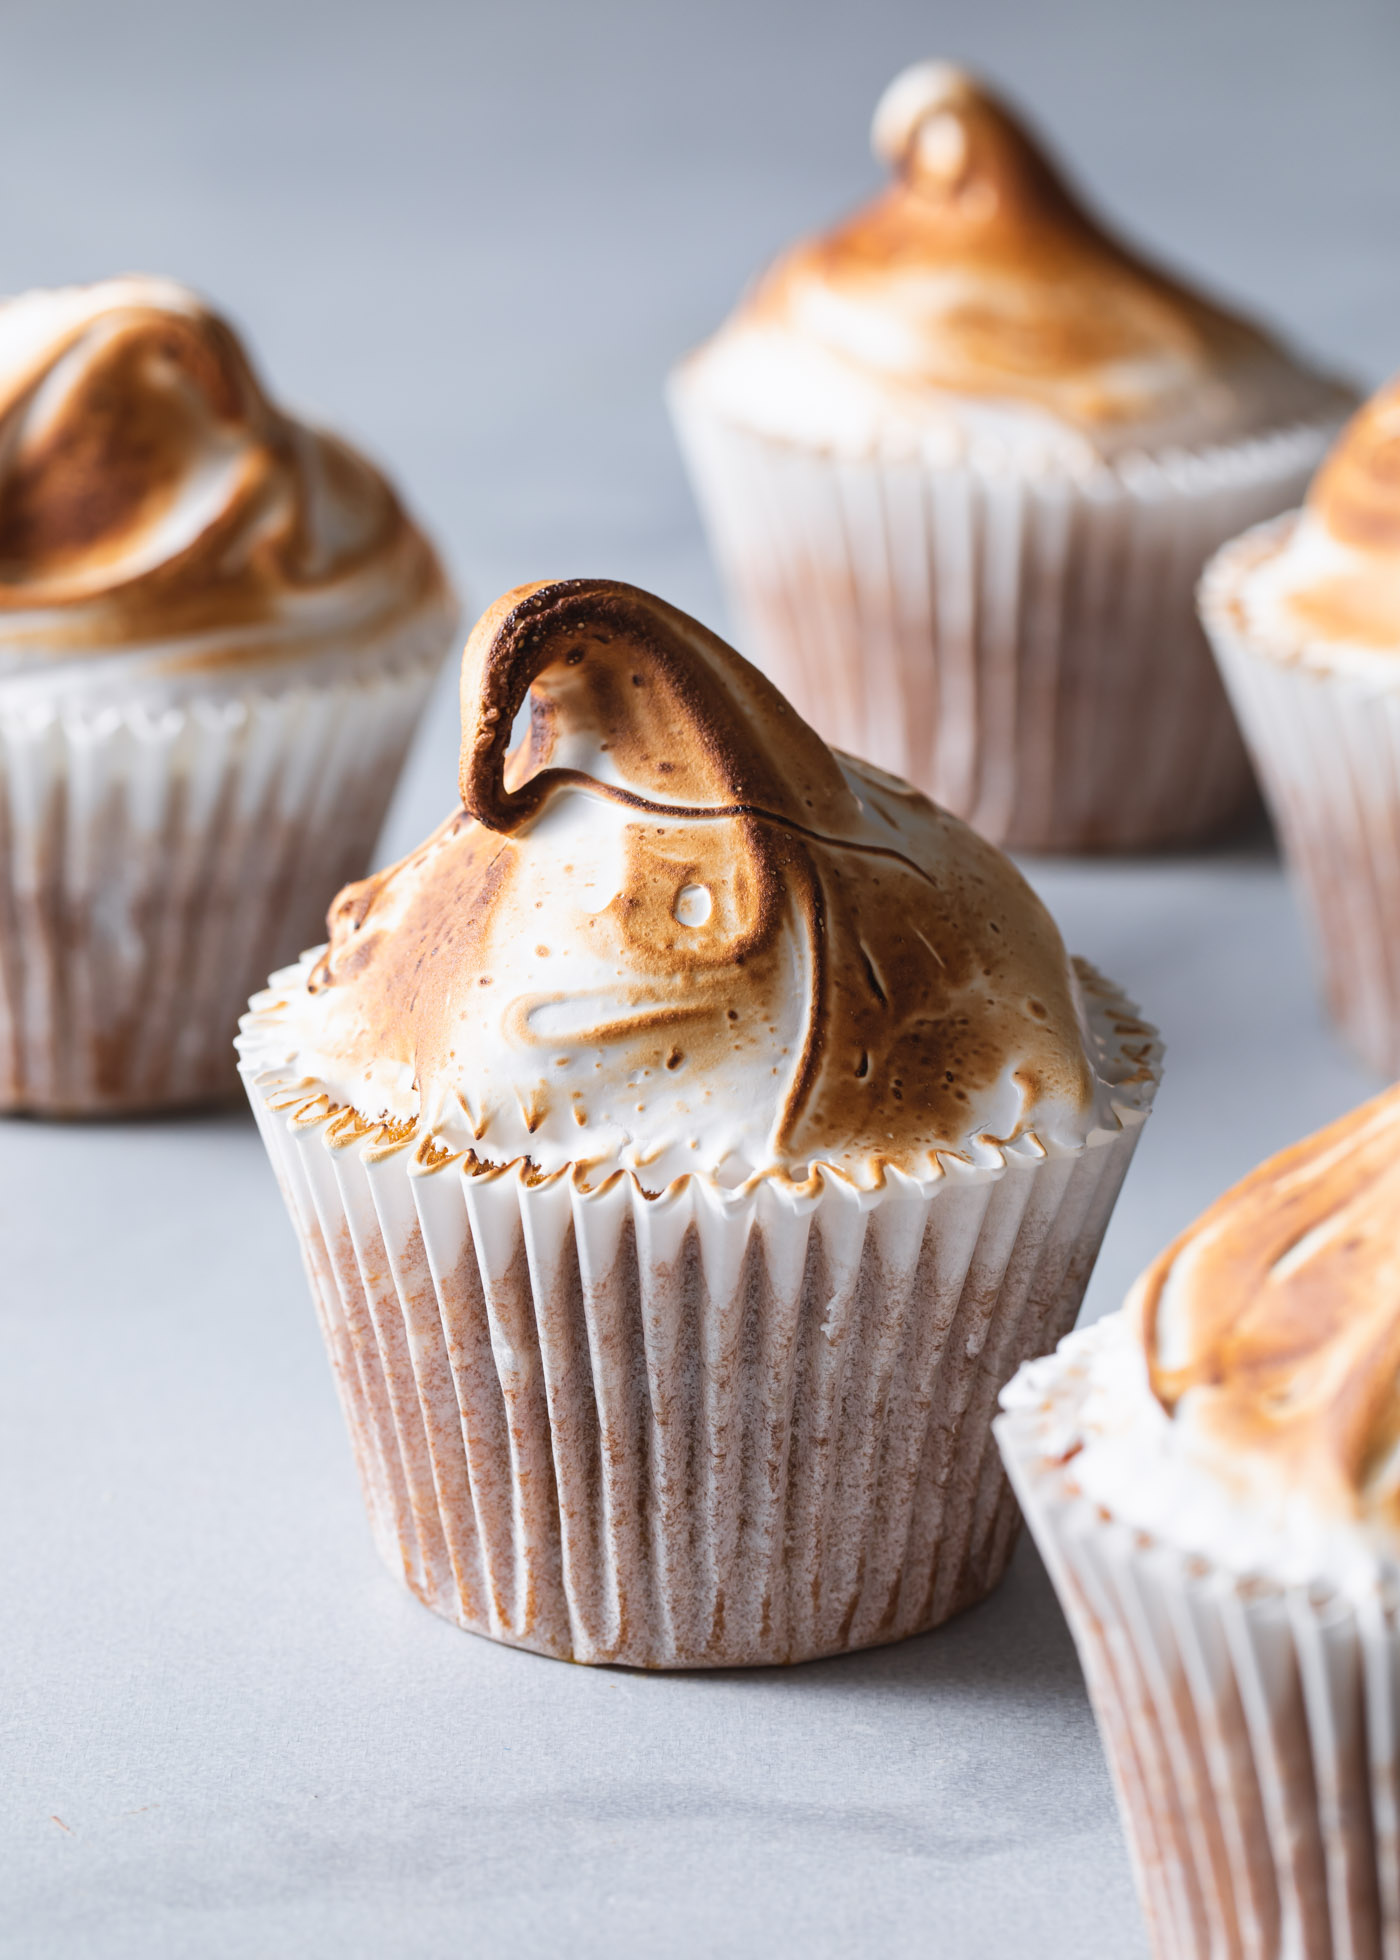 Pumpkin cupcakes with meringue frosting that has been toasted with a kitchen torch